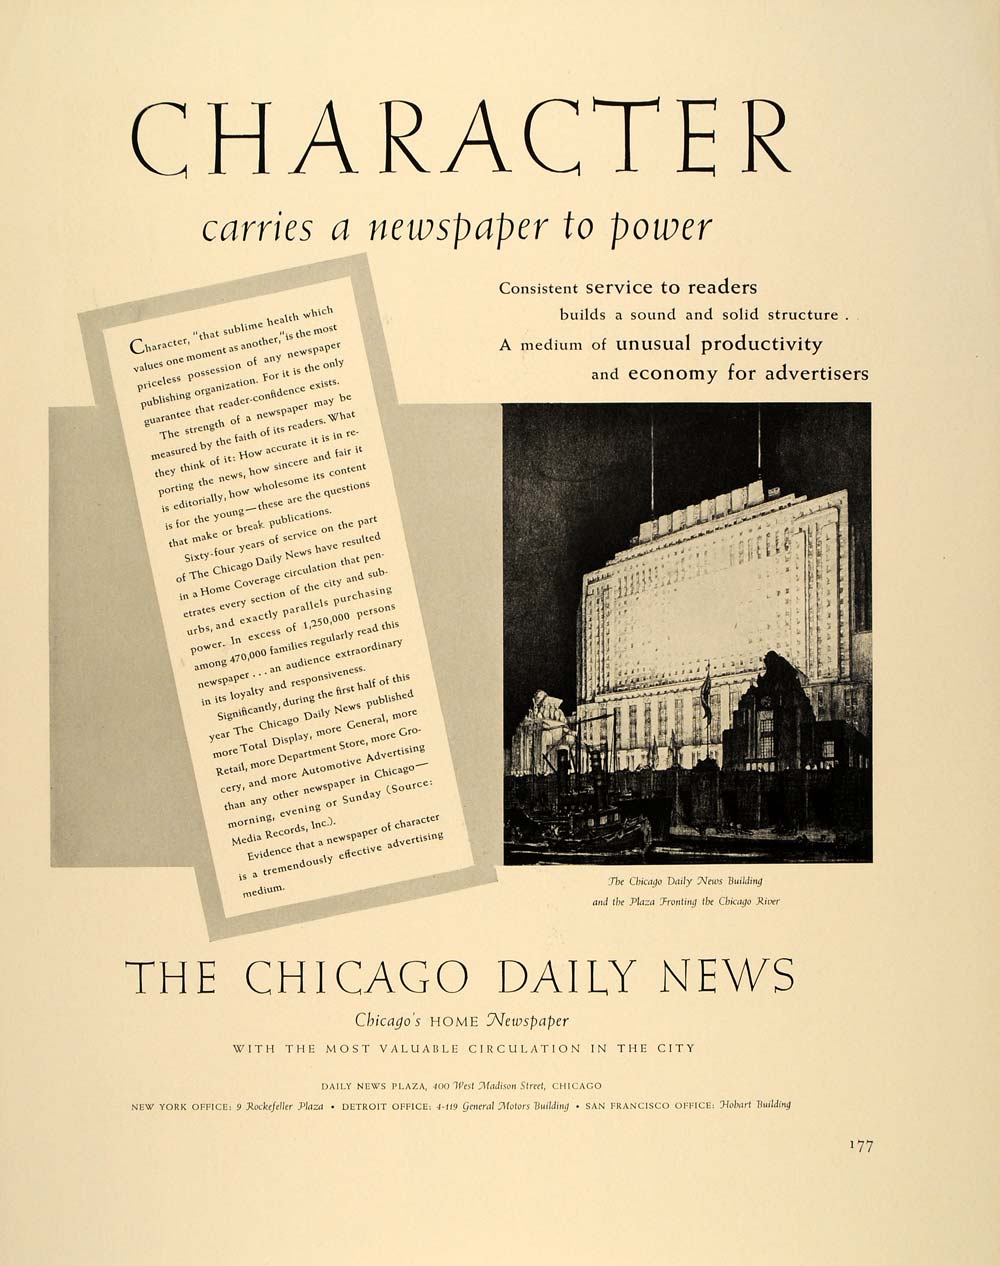 1940 Ad Chicago Daily News Newspaper Building Plaza - ORIGINAL ADVERTISING FT6